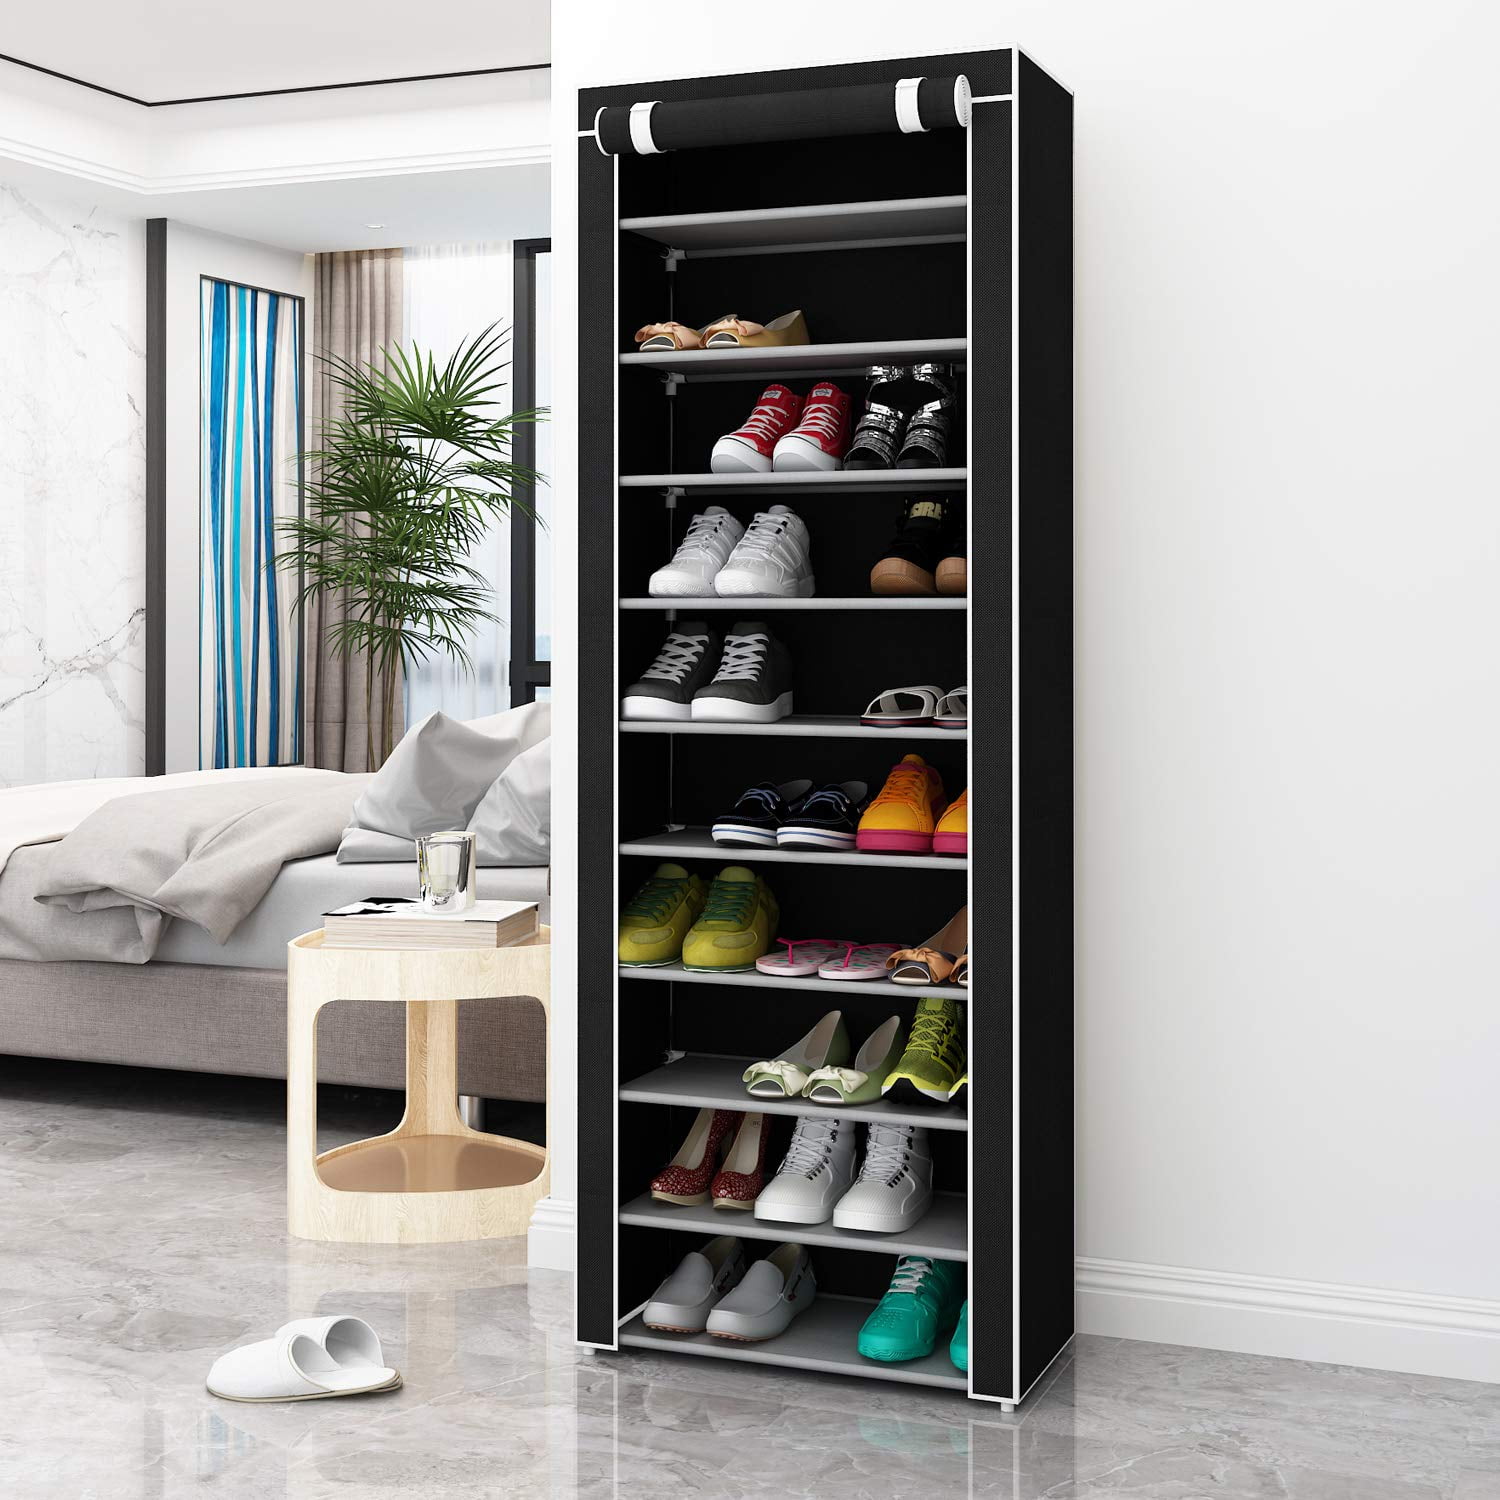 Minimalist Images Of Shoe Racks Cabinets for Small Space